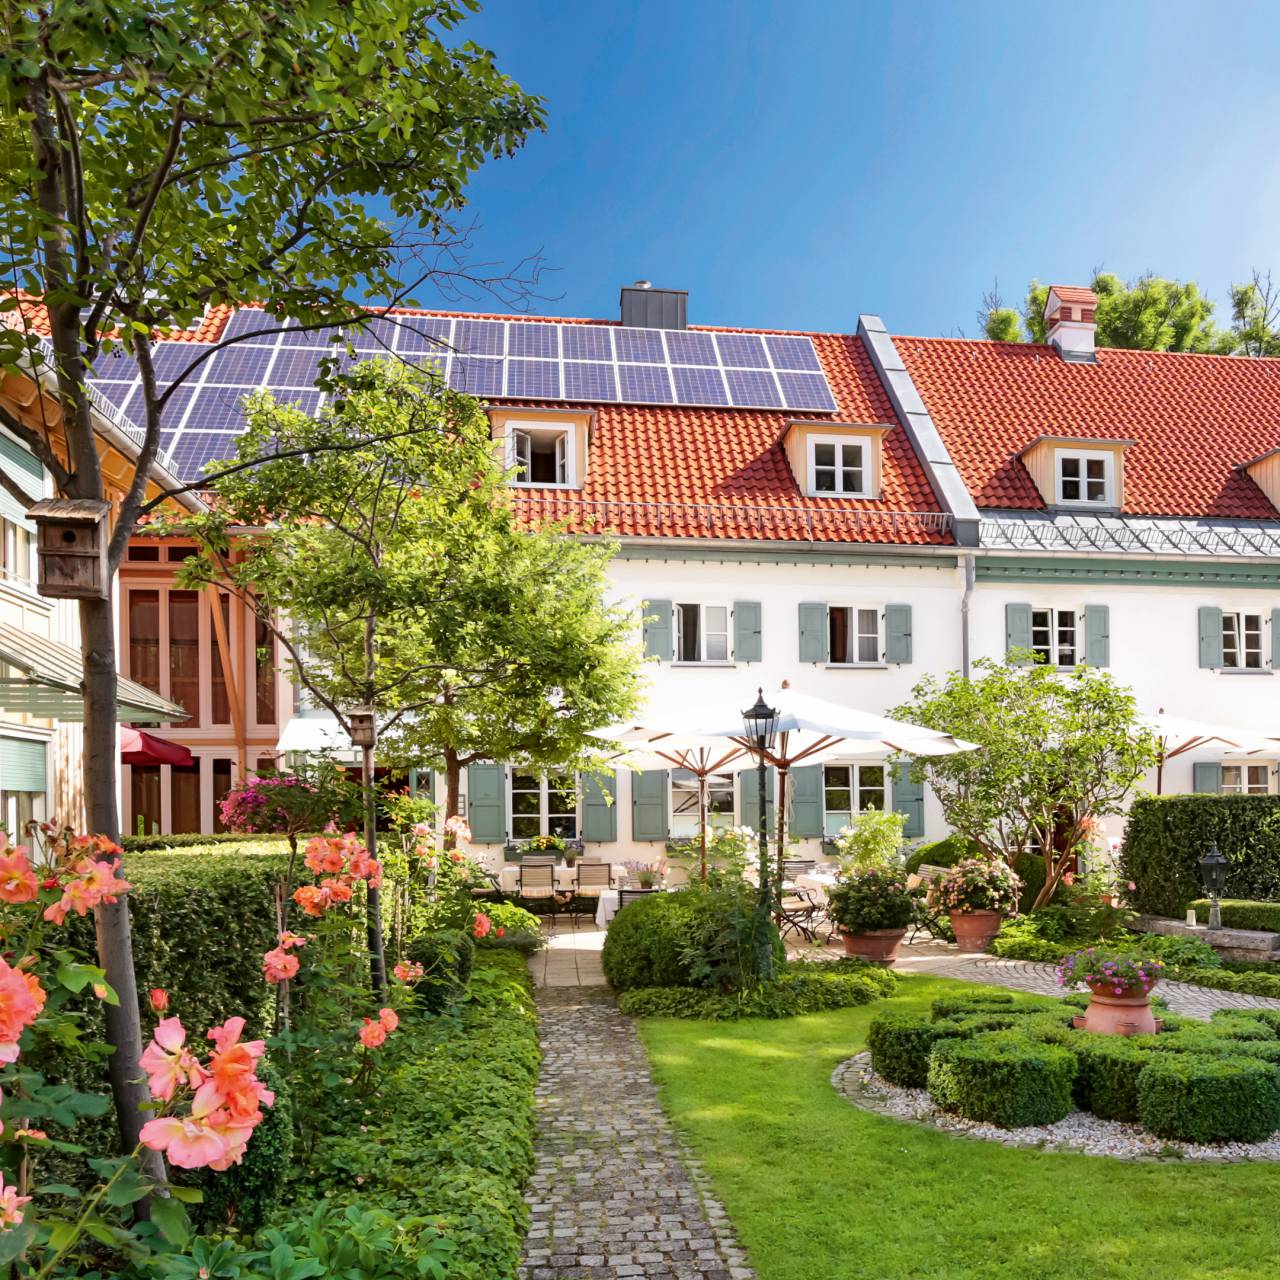 Hotel Seitner Hof in Pullach in the Isar Valley